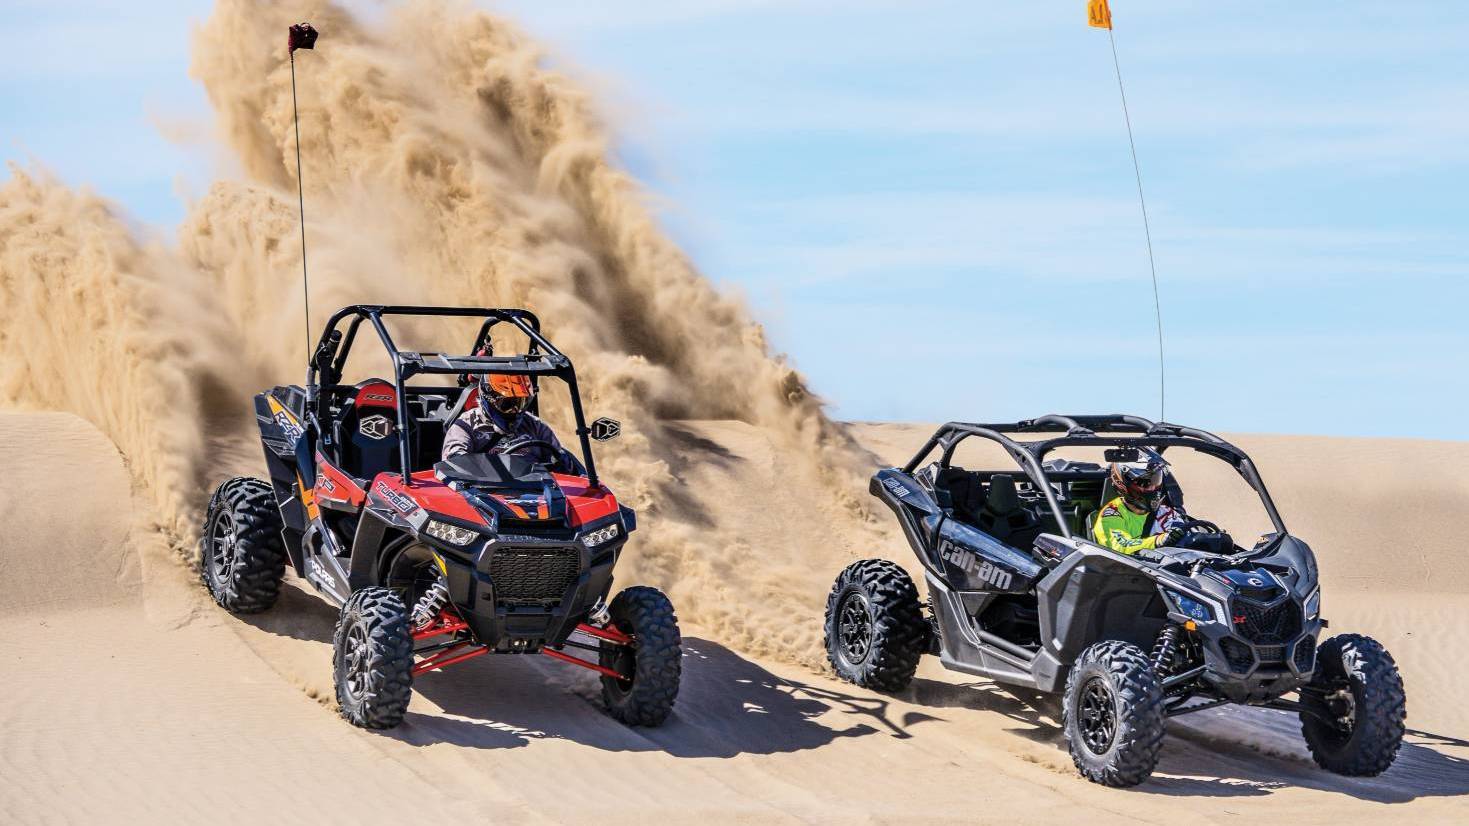 Dune Buggy passenger experience 1000cc for 1 hour